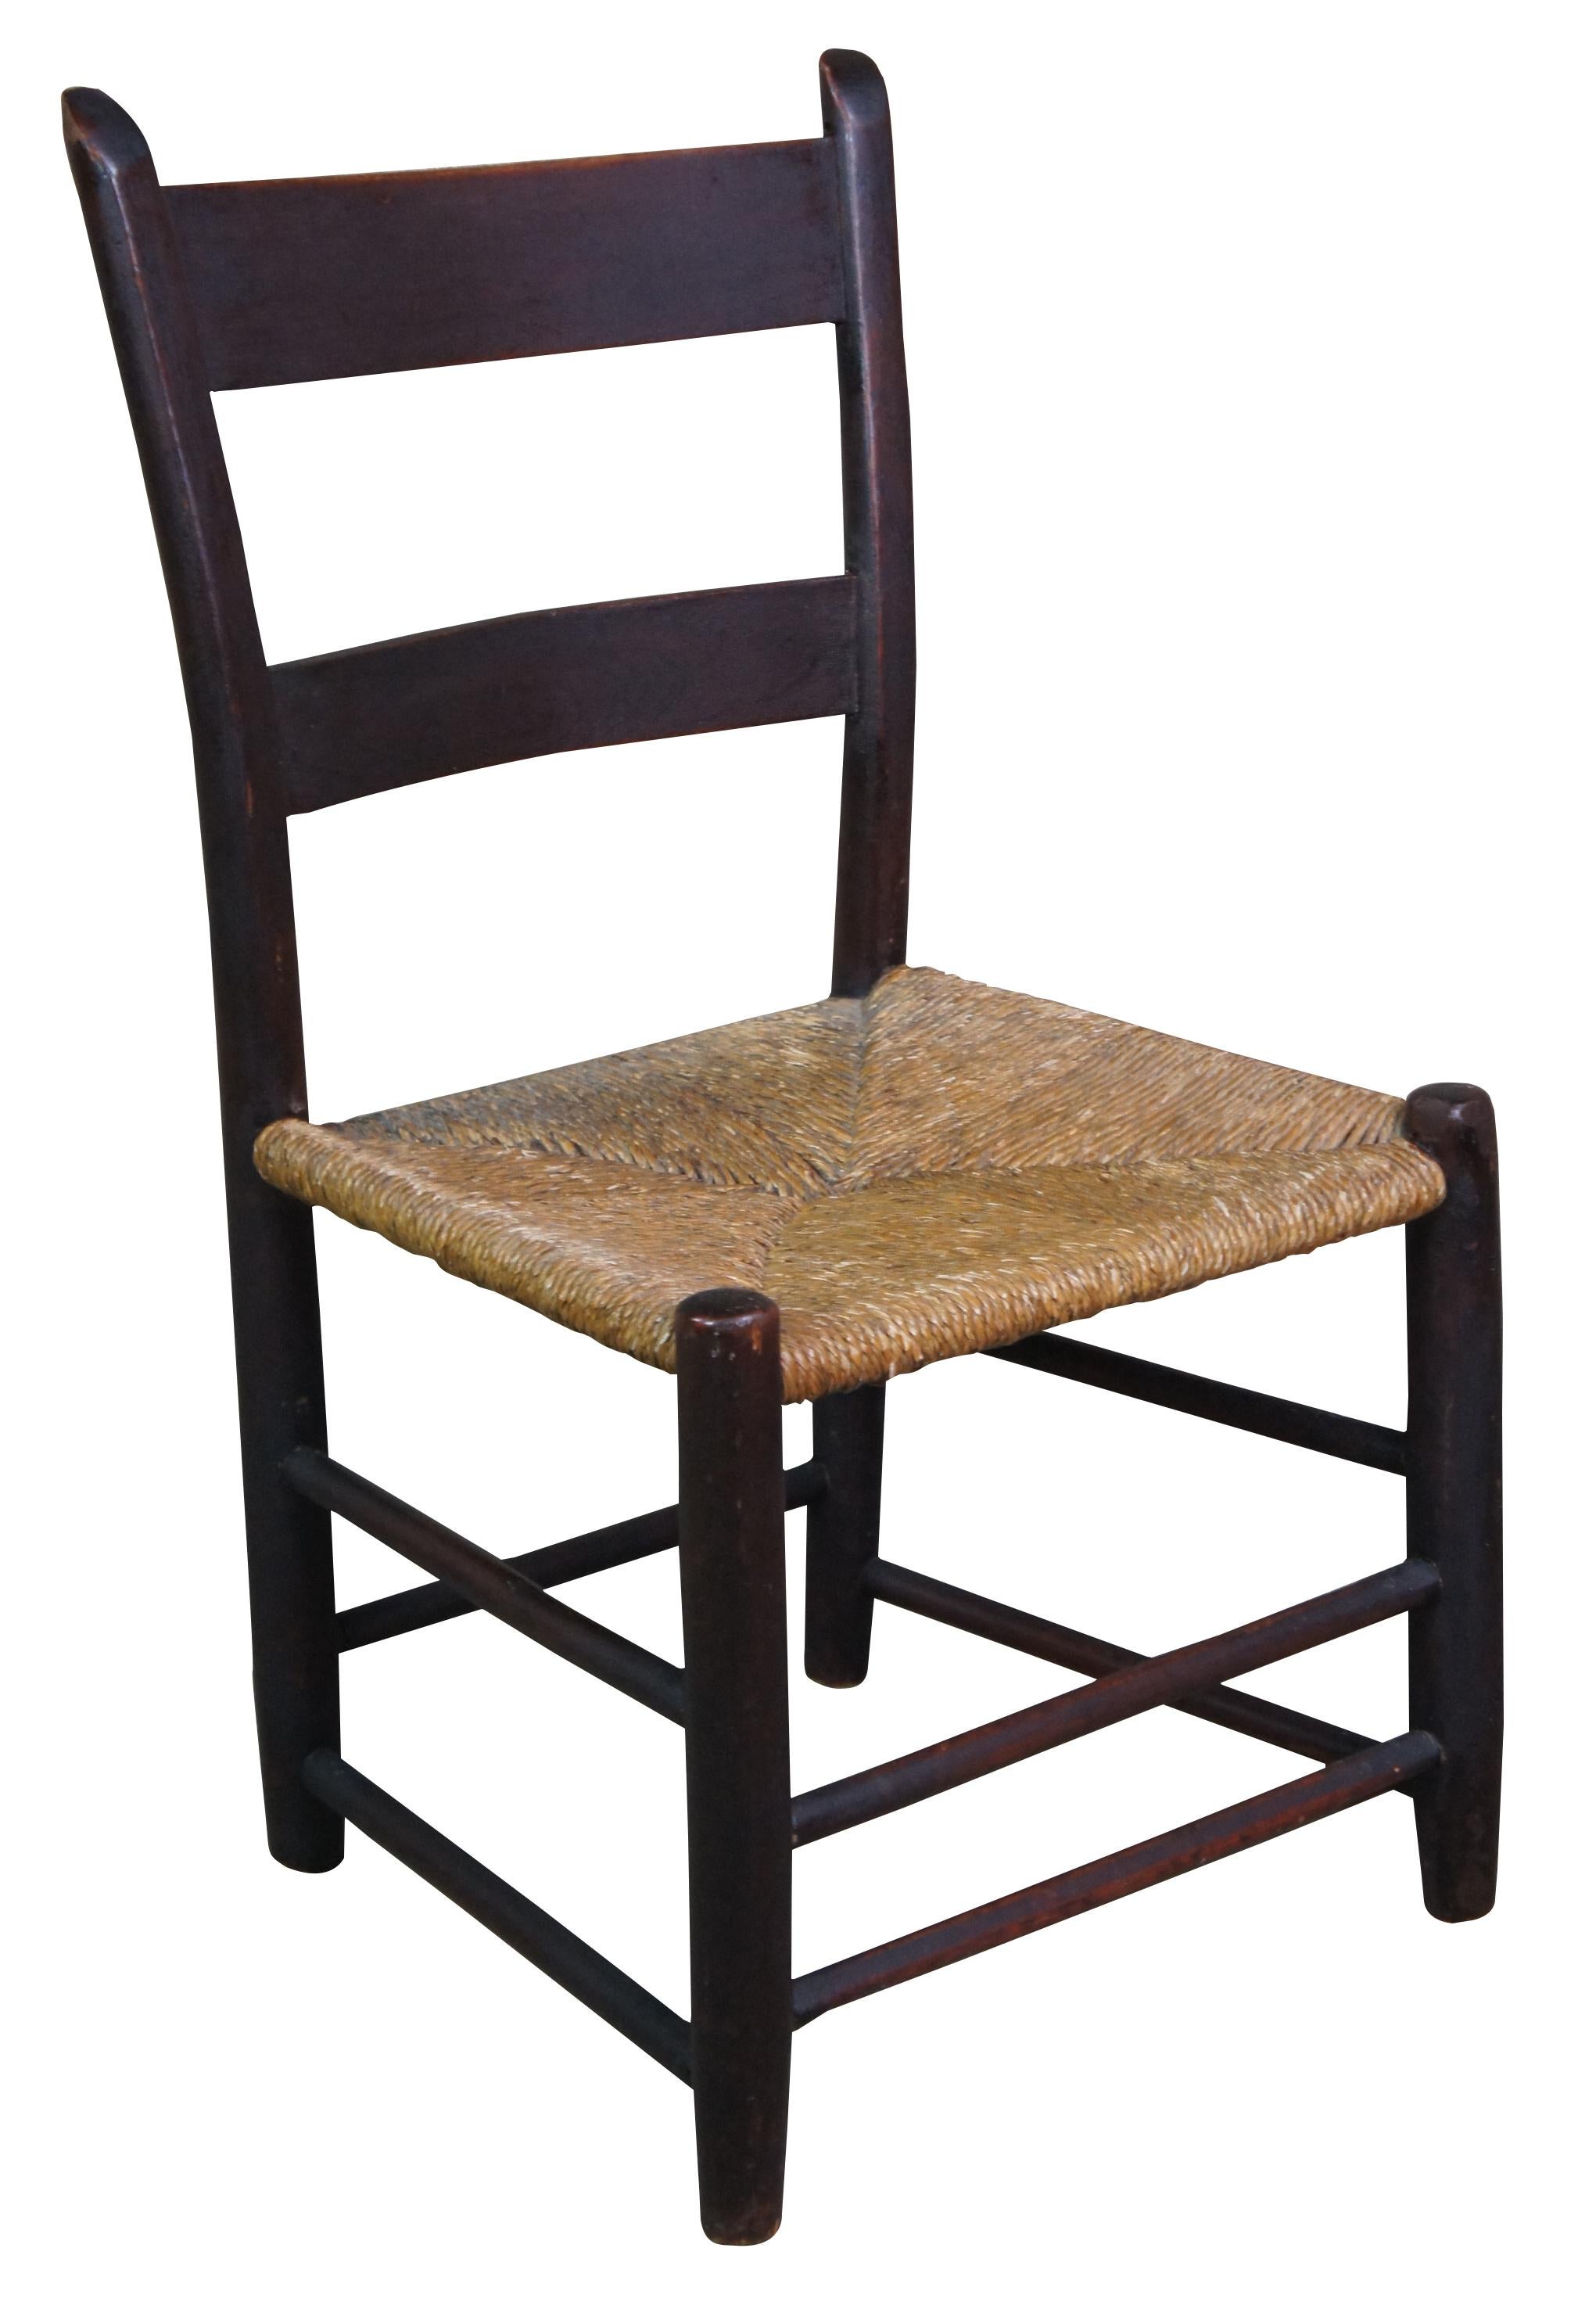 Antique Shaker child sized country farmhouse dining chair featuring ladder back and rush seat.
 